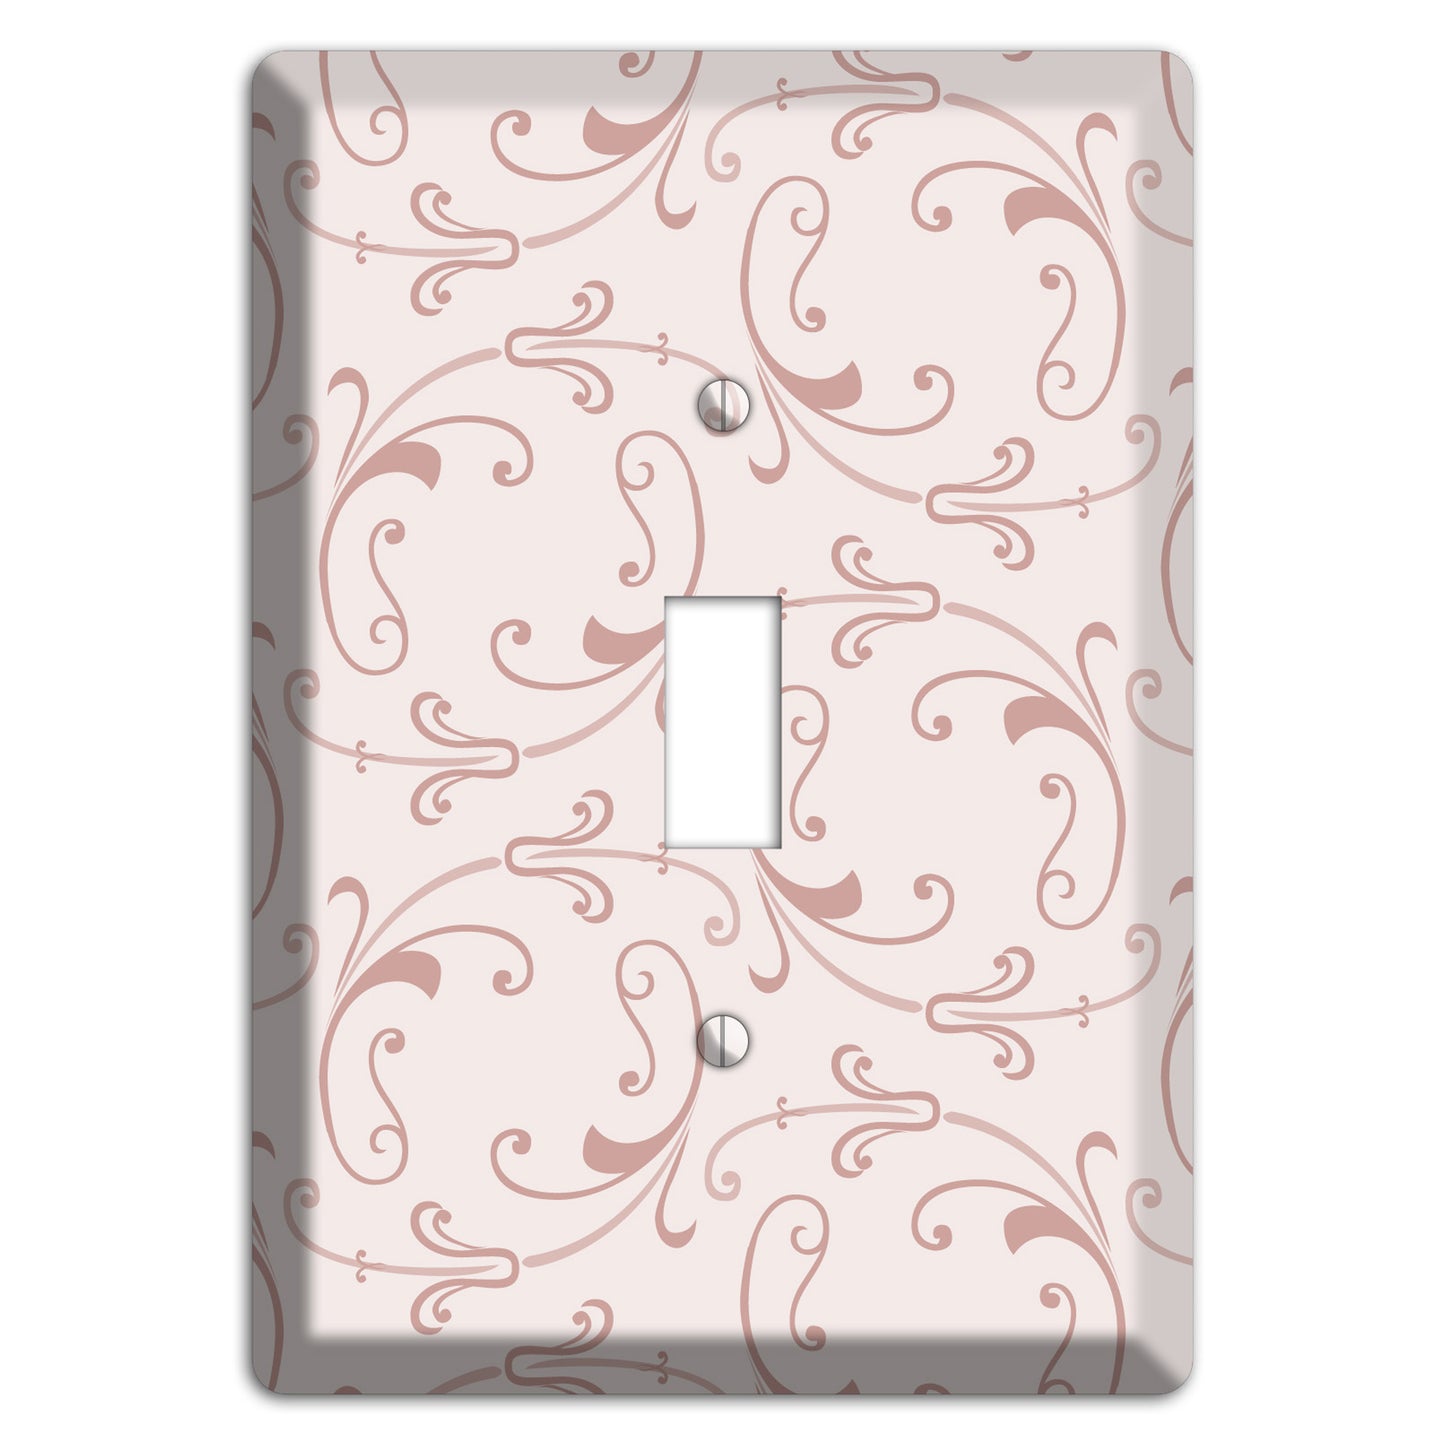 Dusty Rose Victorian Sprig Cover Plates